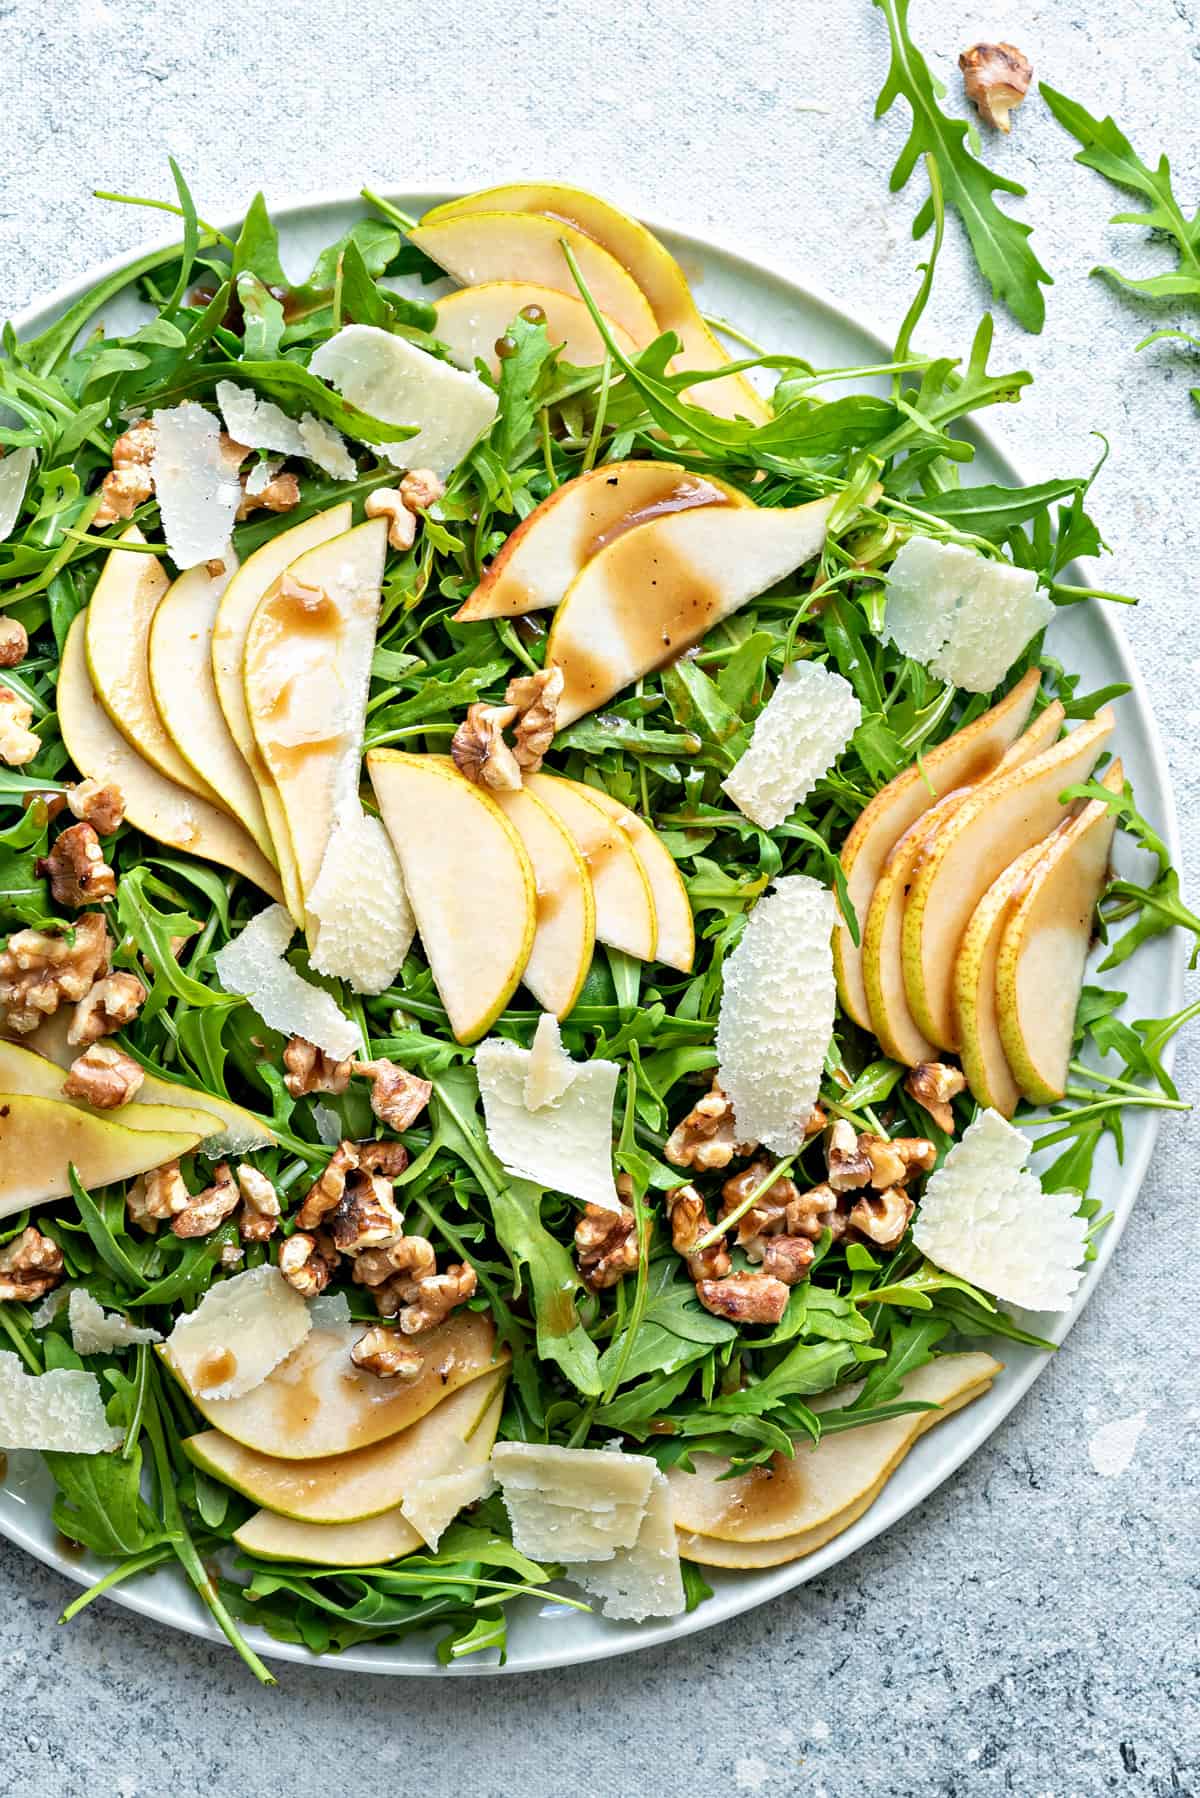 Top down close-up of large plate of rocket, walnuts and pear salad drizzled with balsamic vinaigrette. 